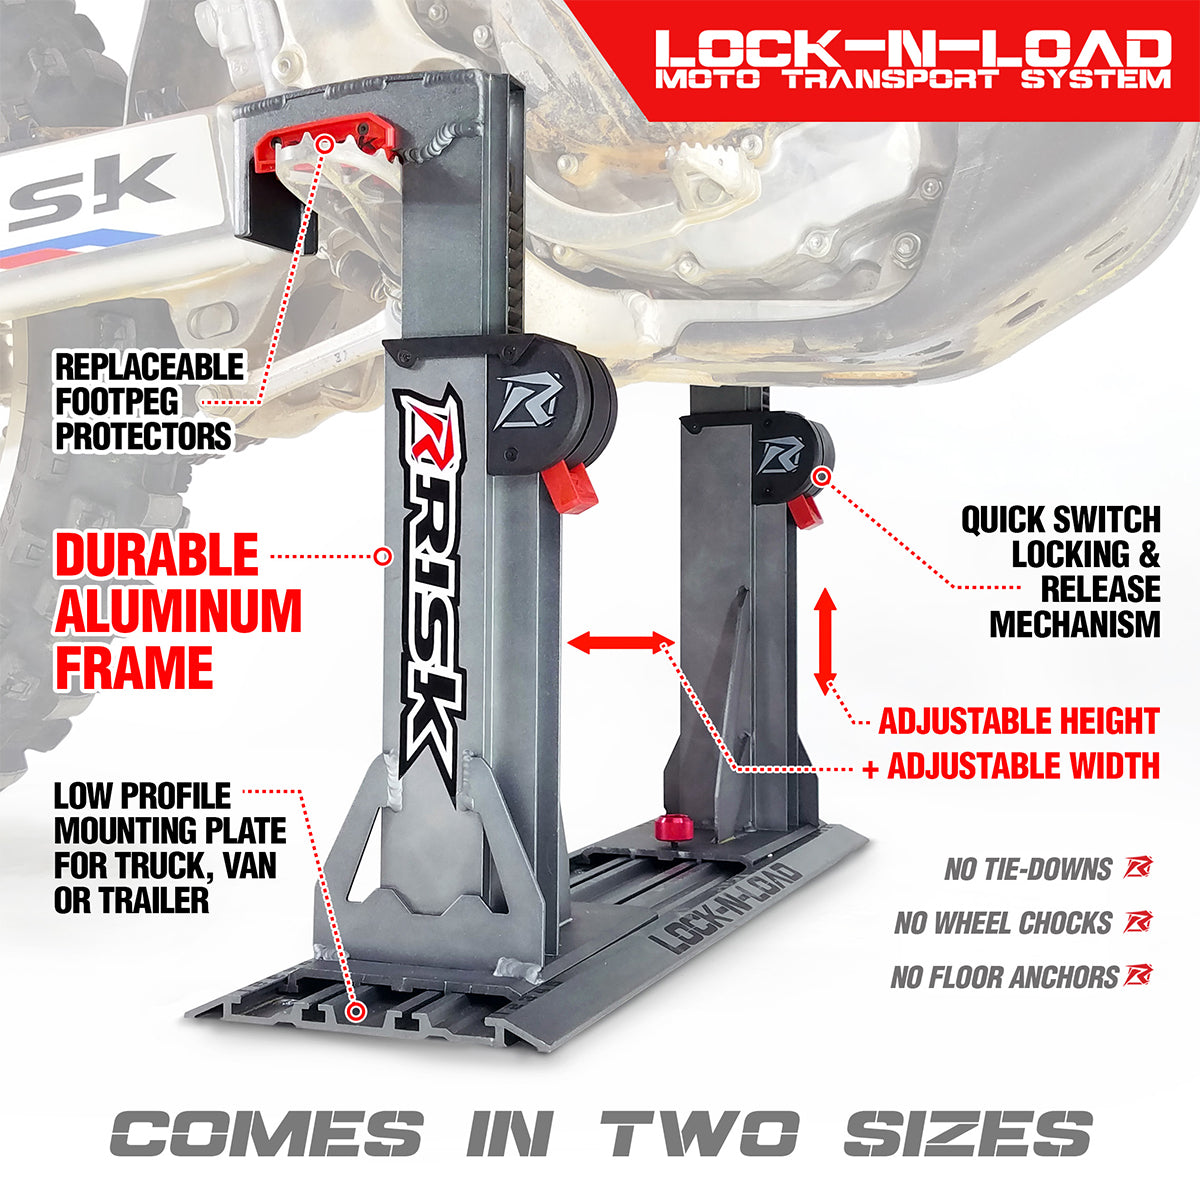 Support moto Risk Racing Lock and Load Pro